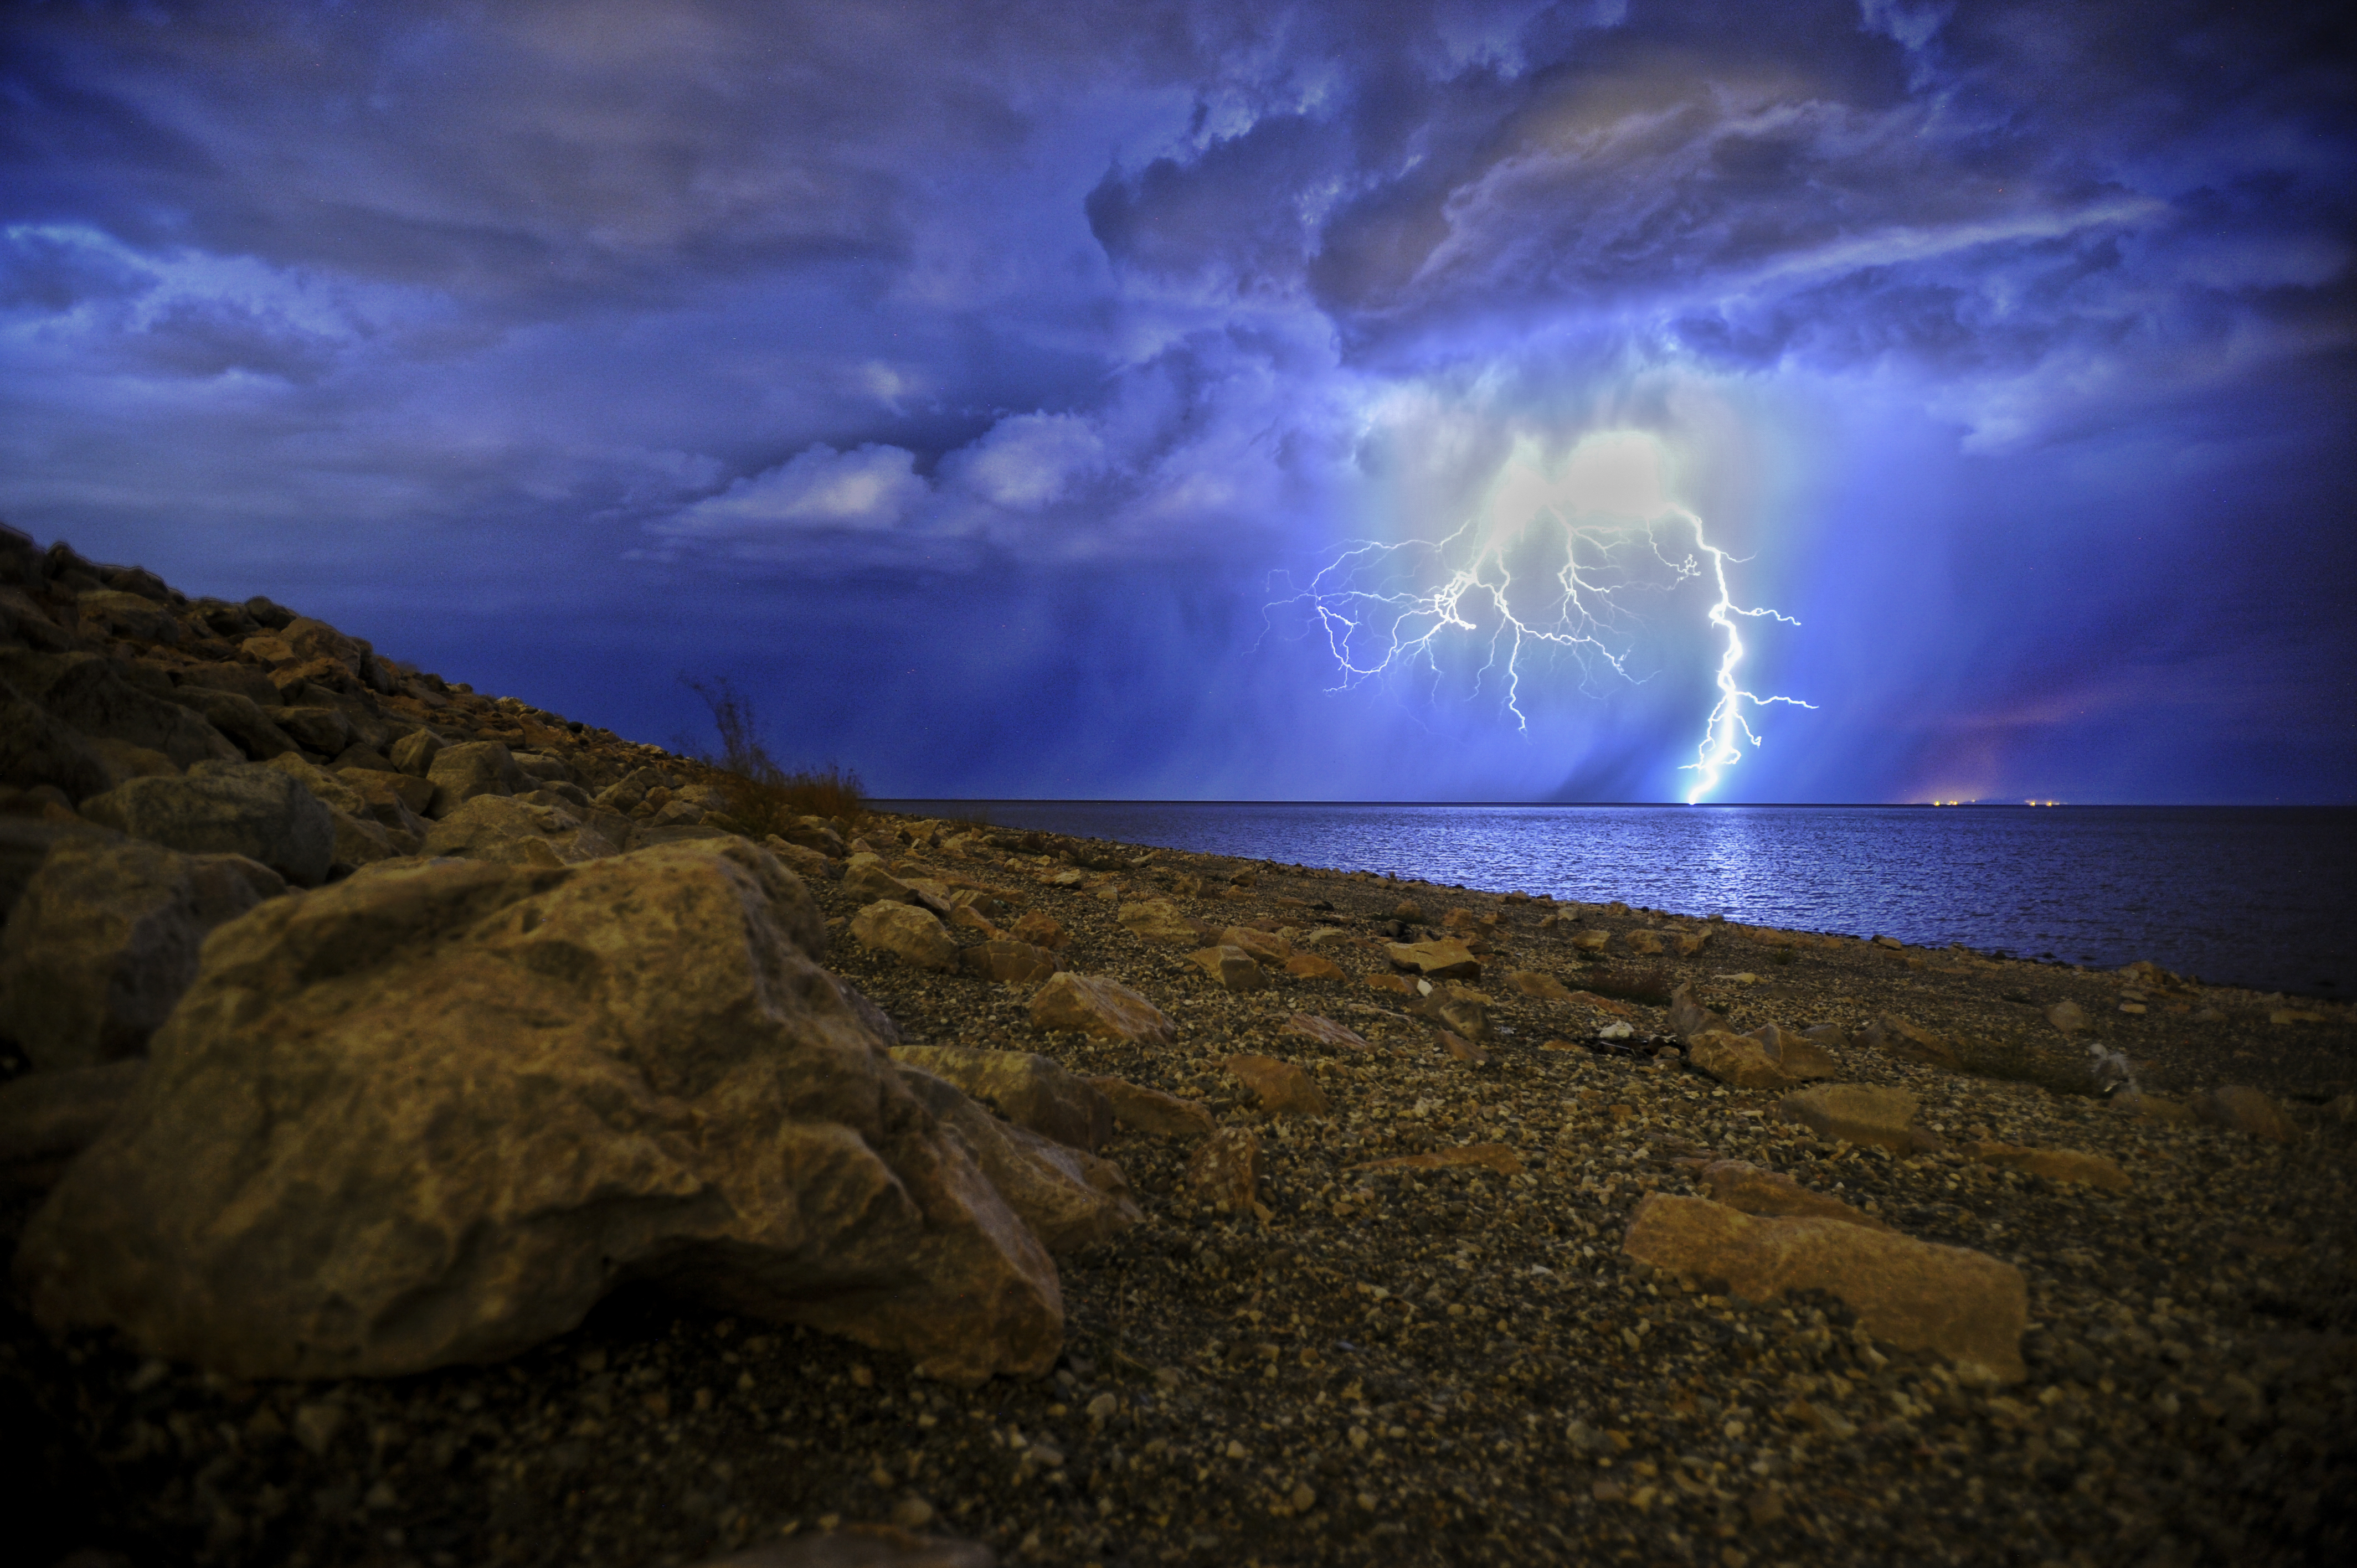 thunderstorm, nature, night, lake, shore, bank, mainly cloudy, overcast, storm